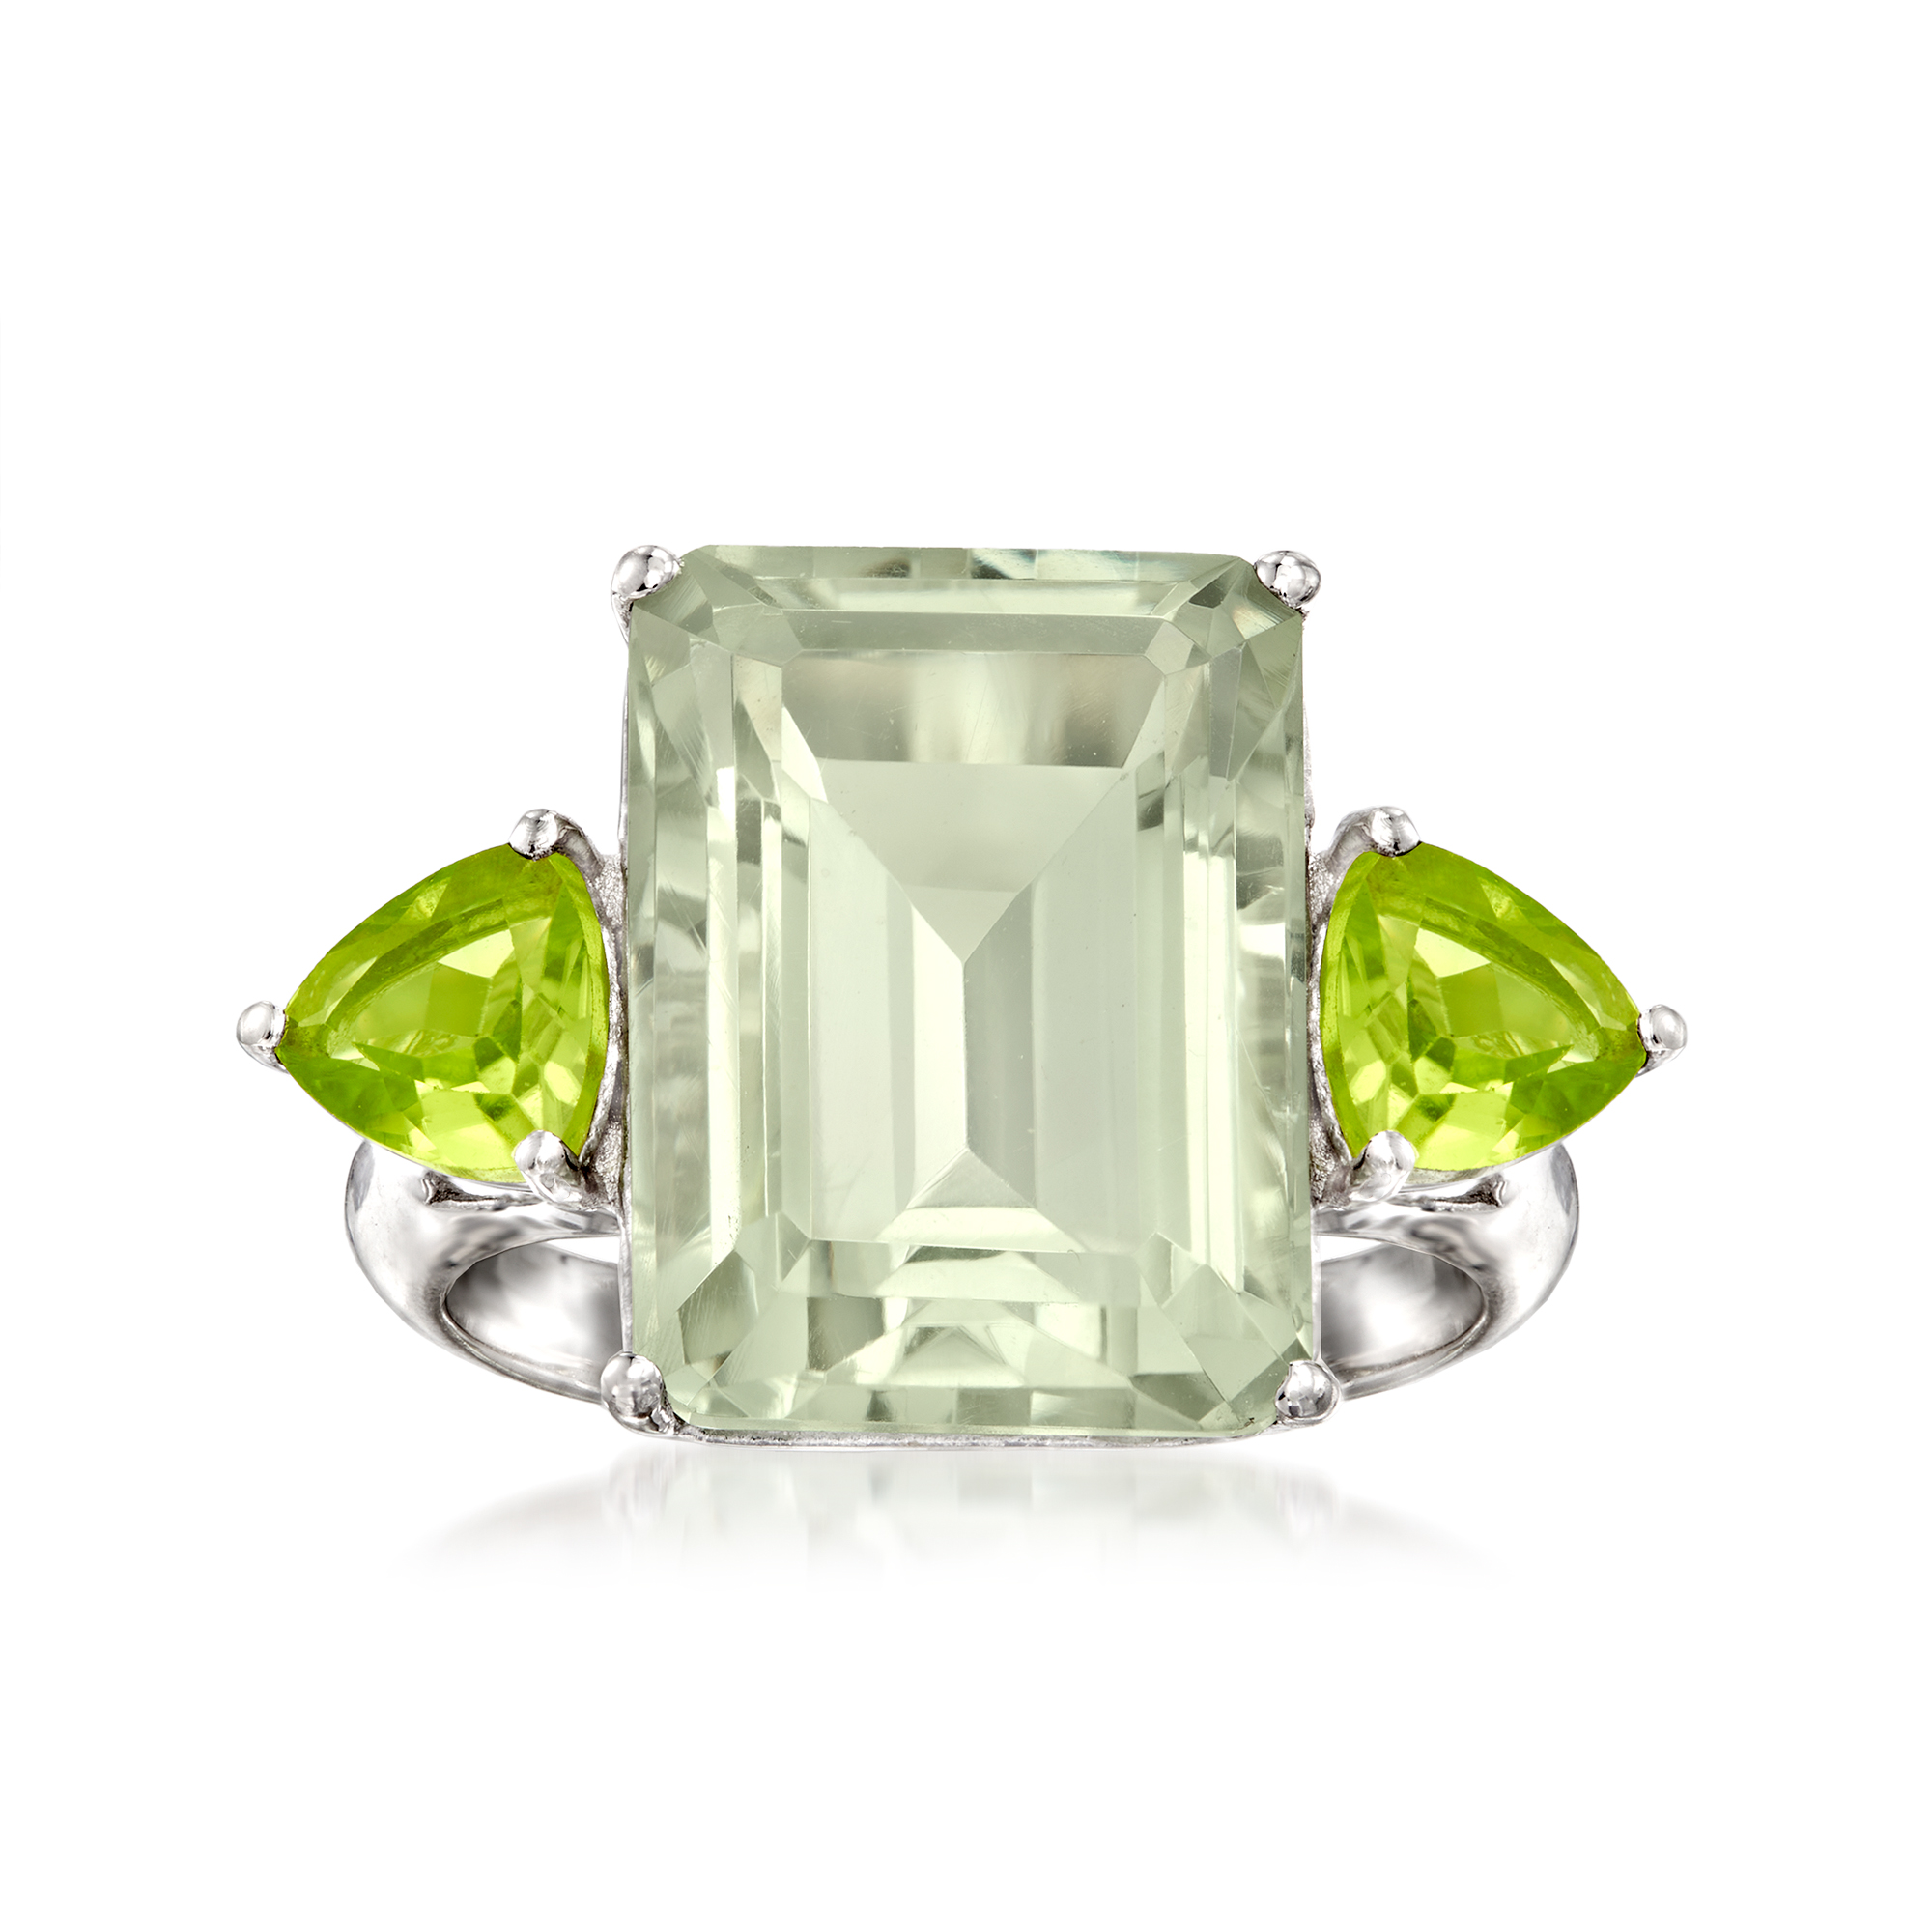 11.00 Carat Emerald-Cut Prasiolite and 1.40 ct. t.w. Peridot Ring in  Sterling Silver | Ross-Simons